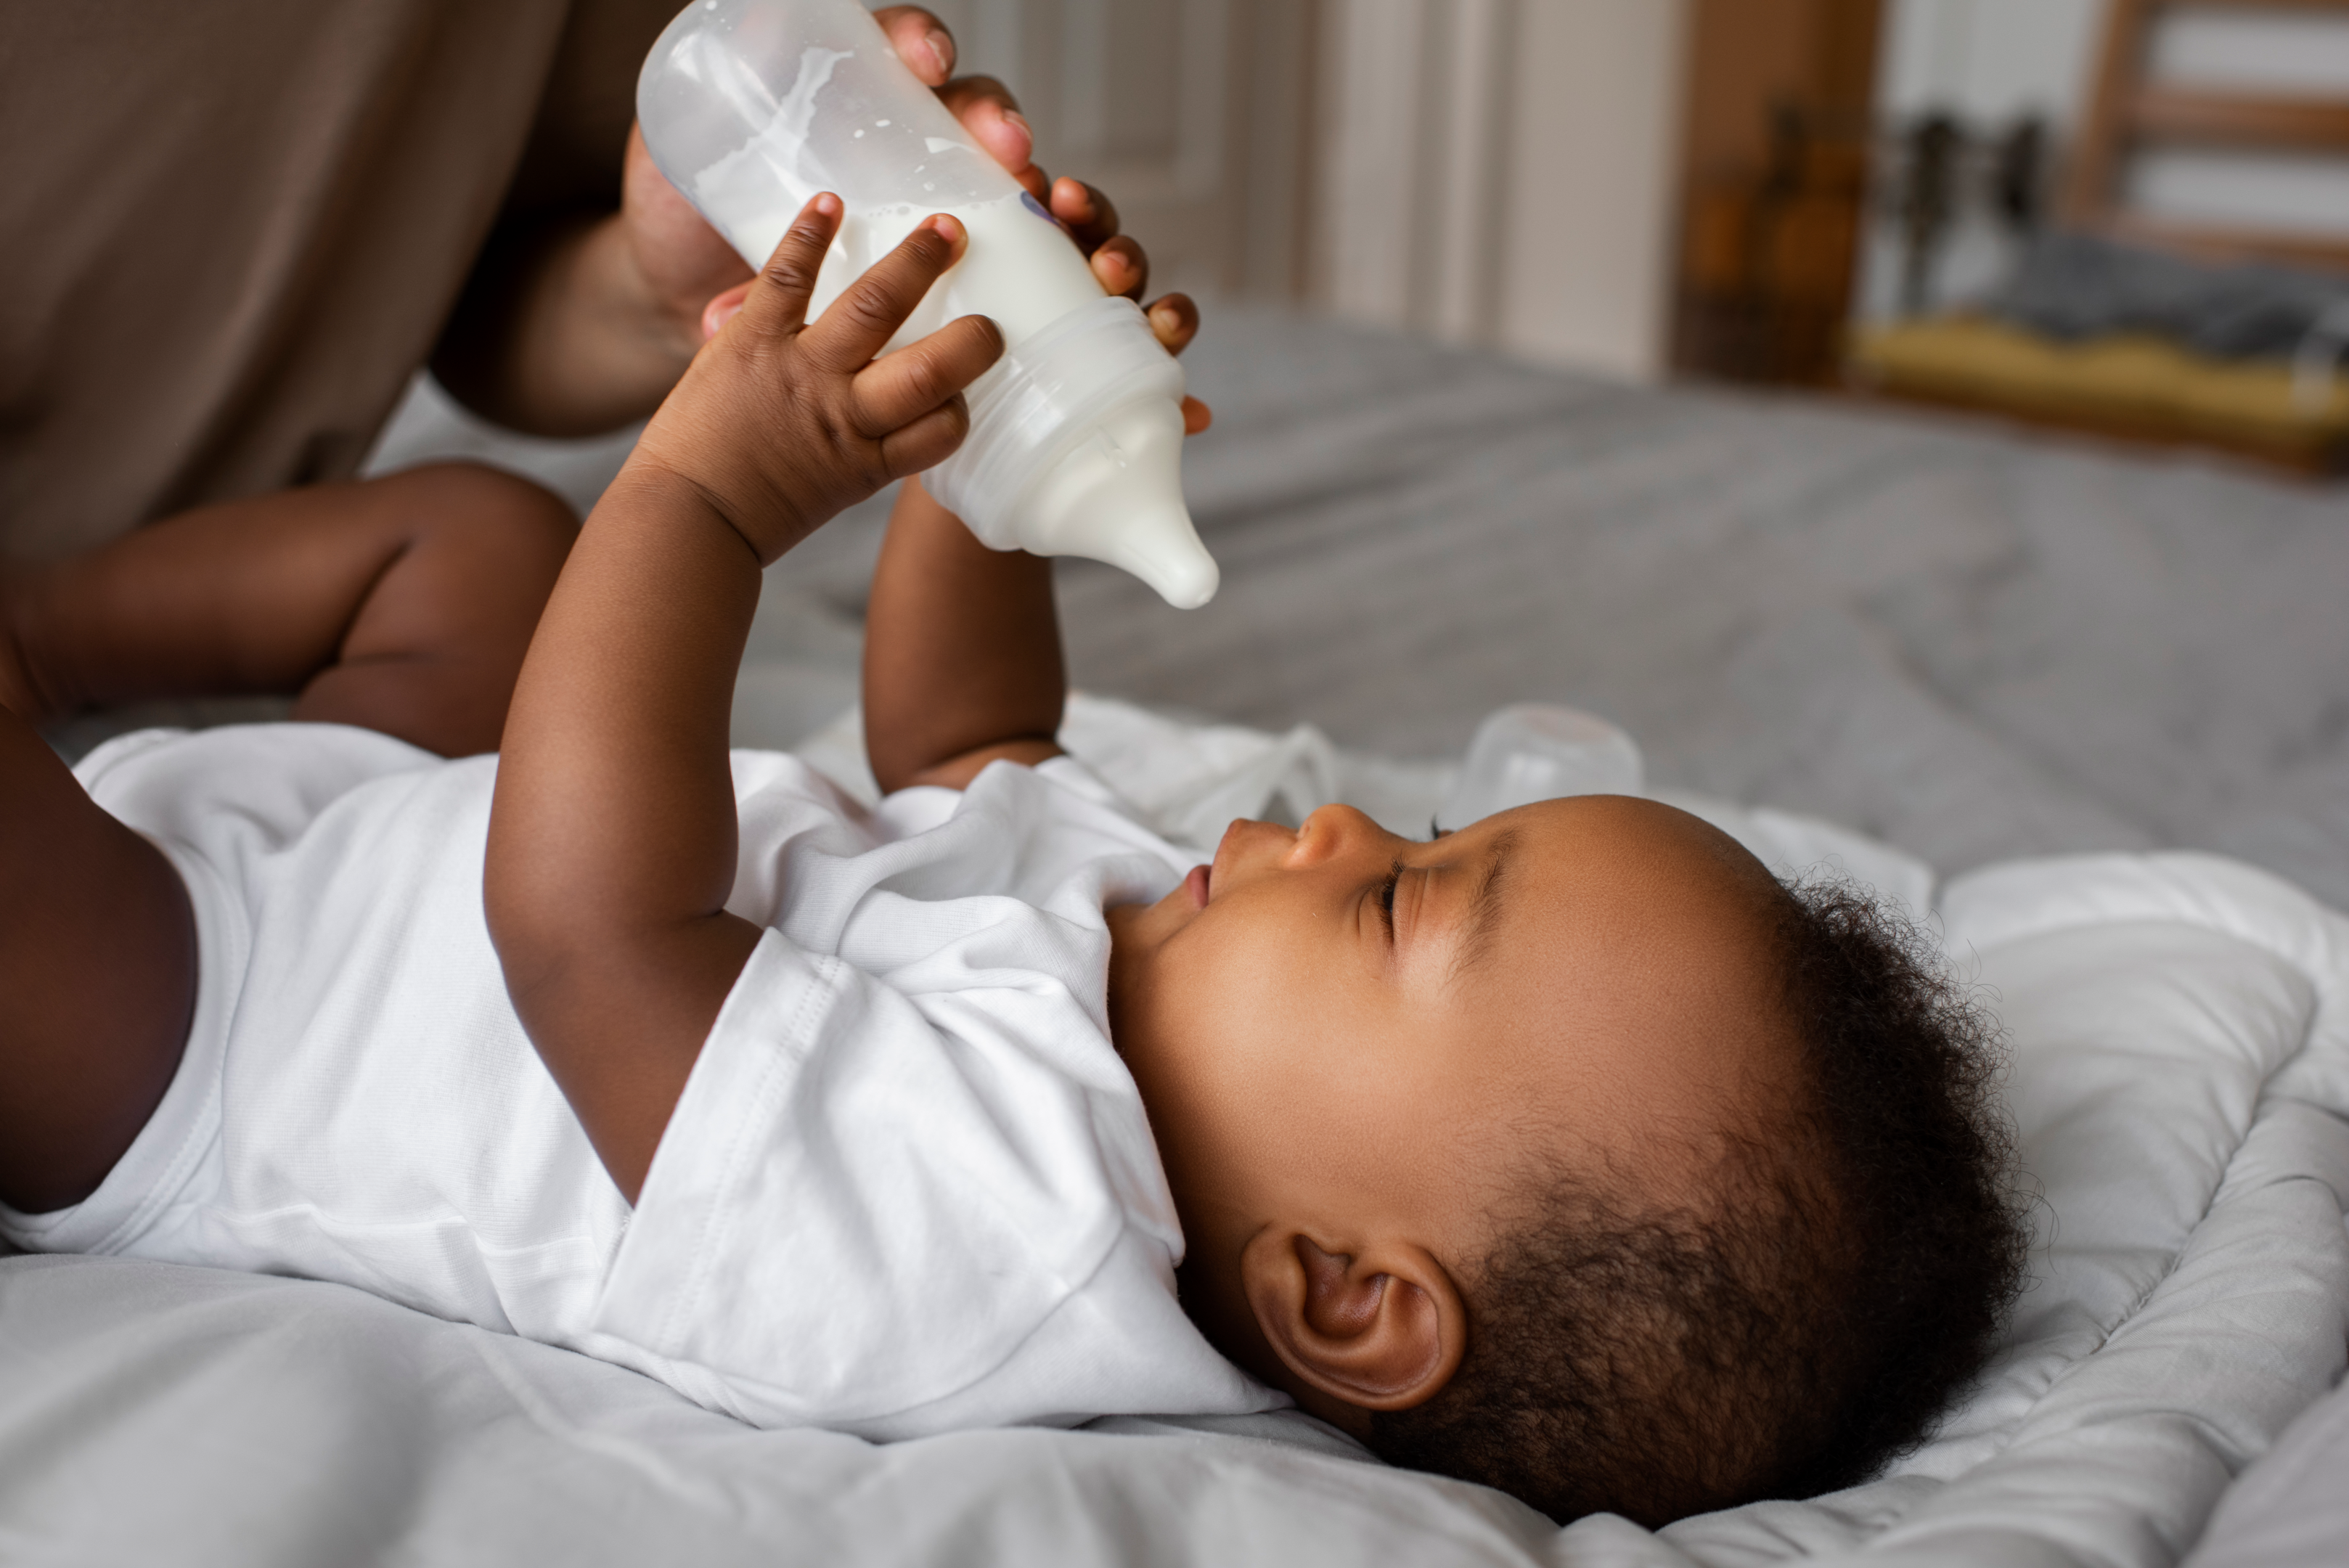 A feeding bottle is an excellent place for bacterial growth.